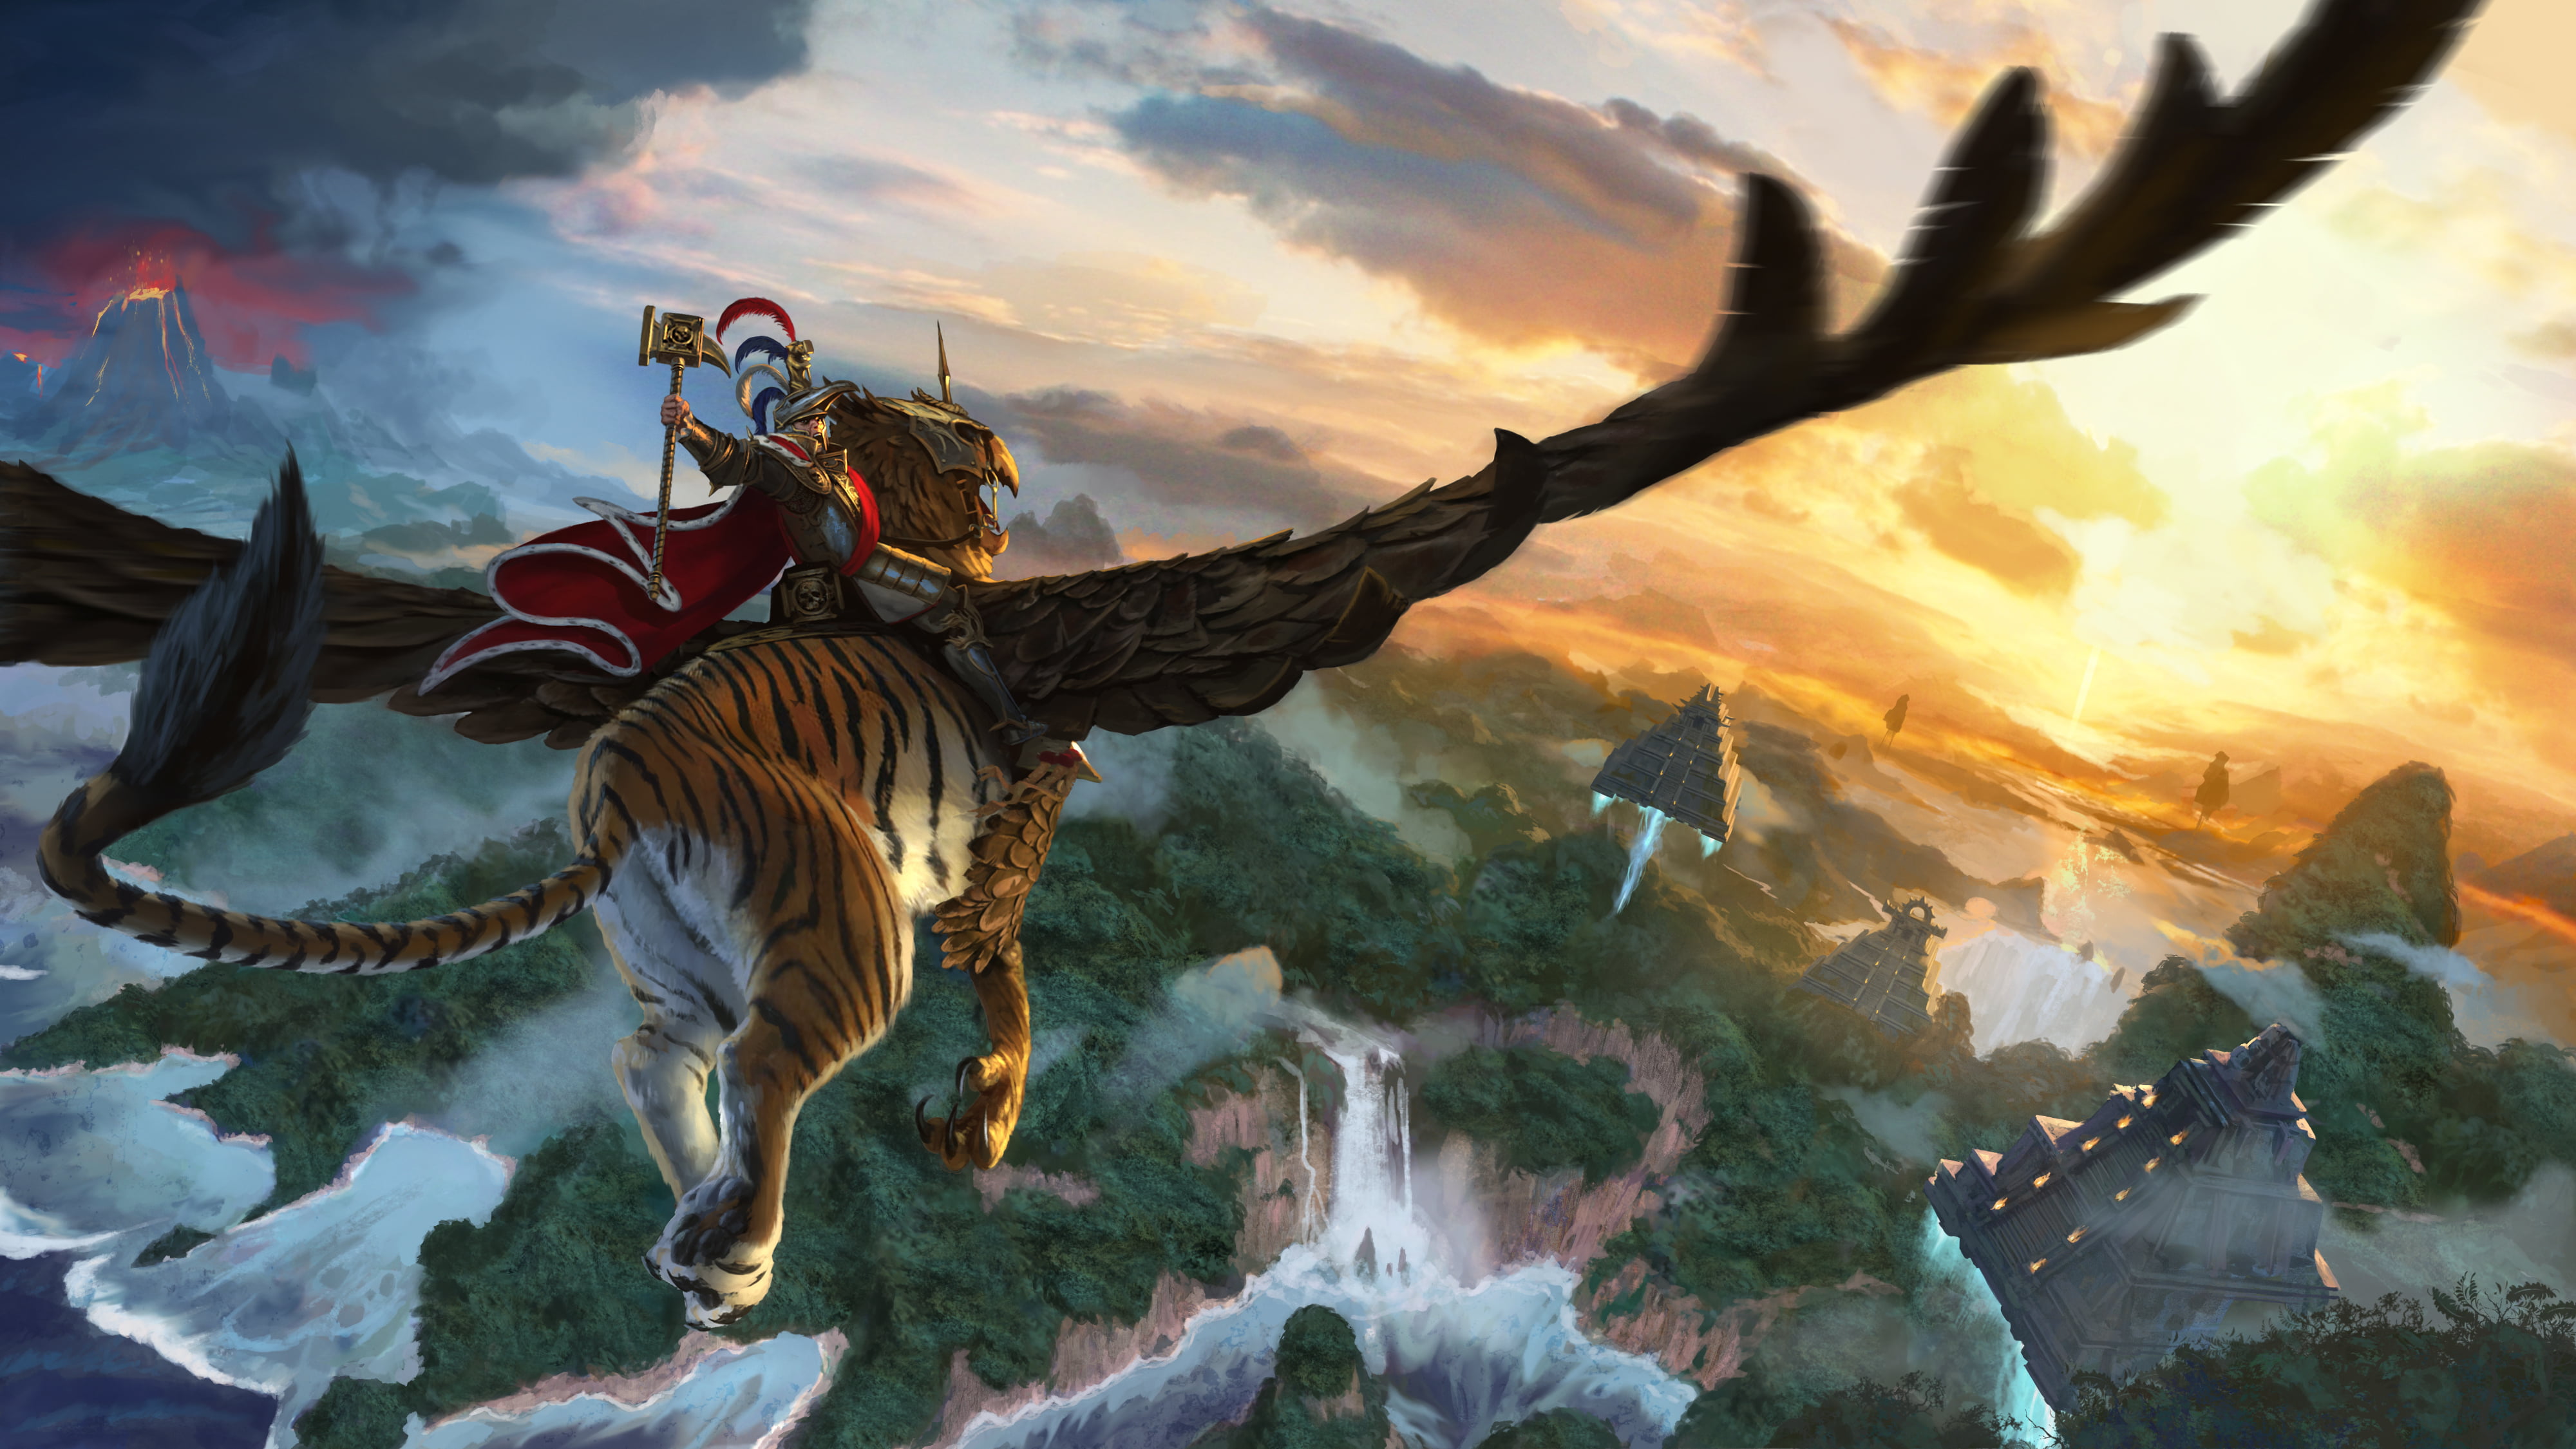 Winged Tiger Over Mountain Illustration HD Wallpaper